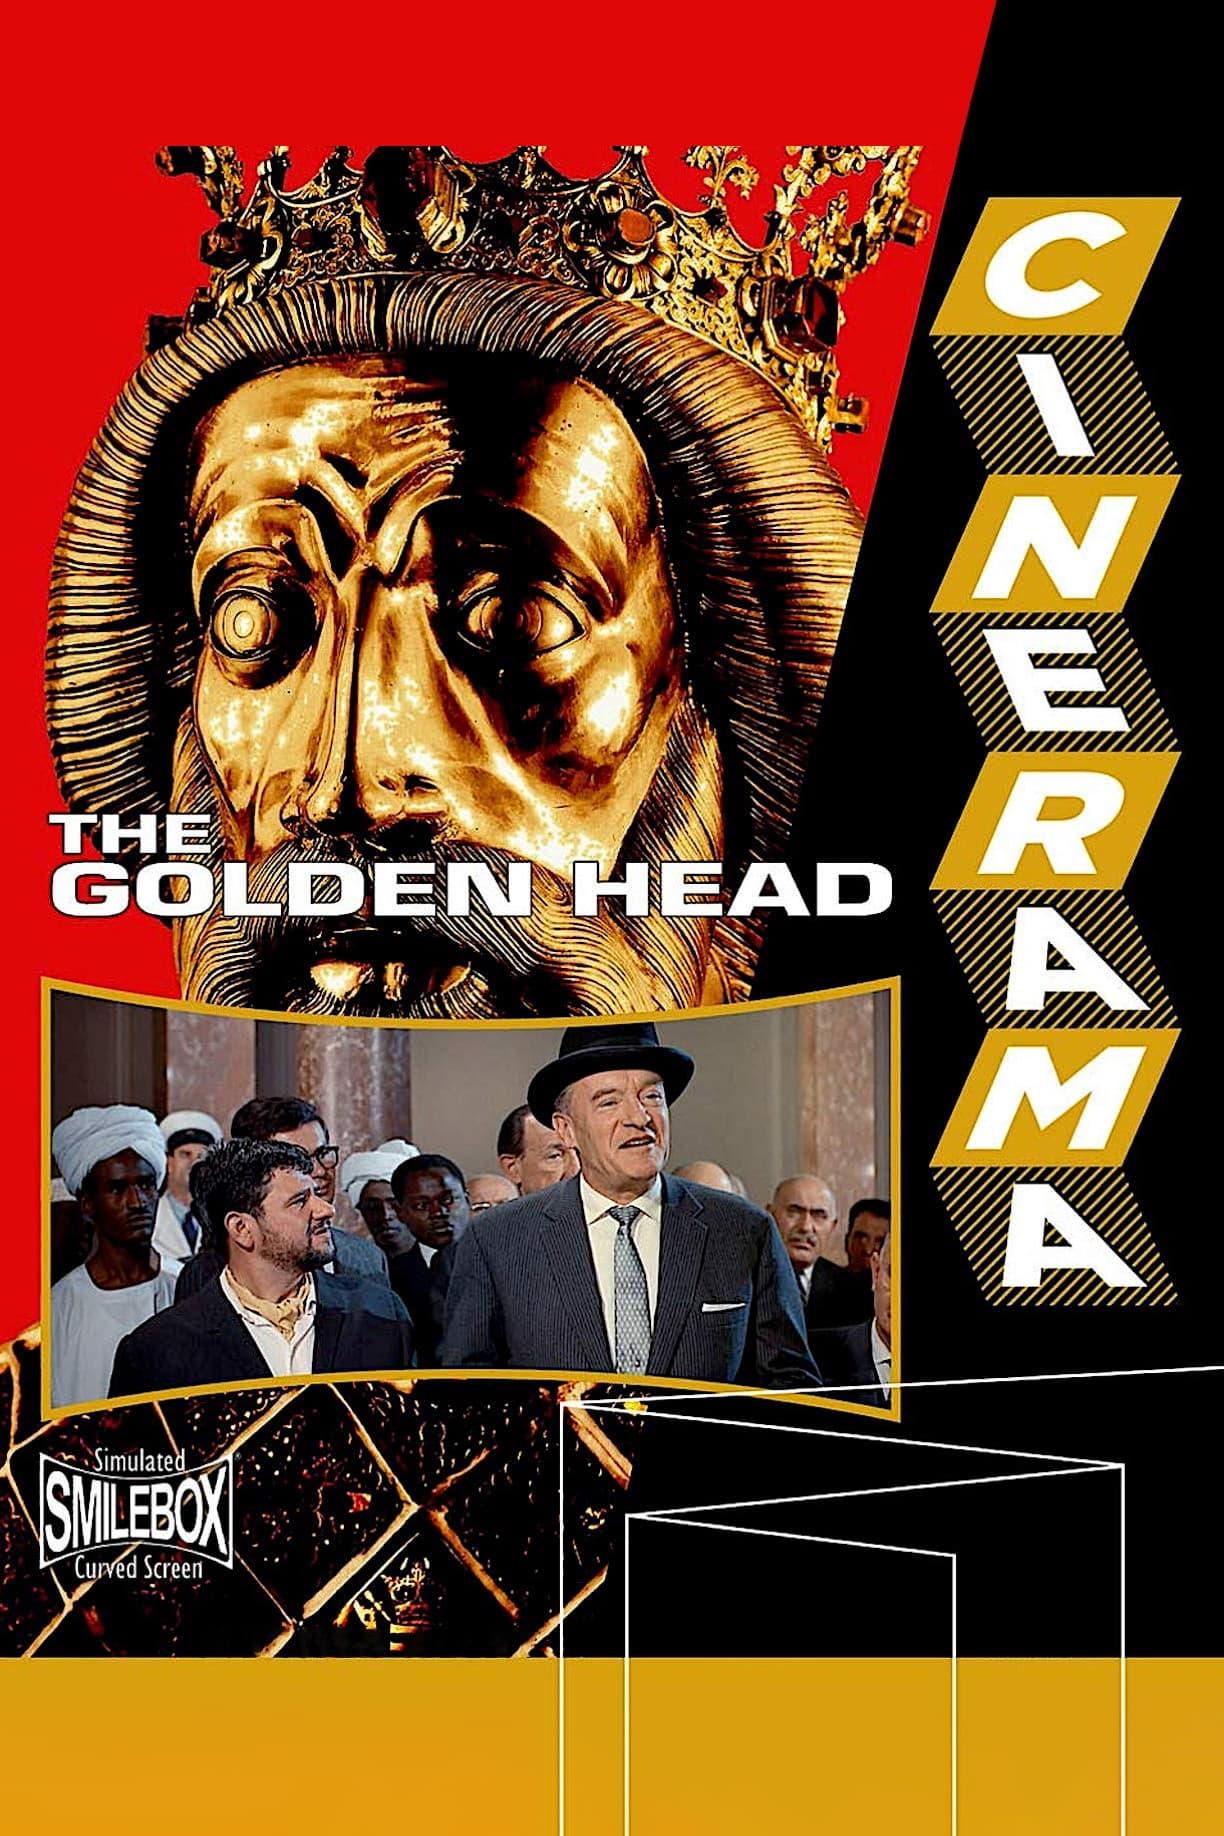 The Golden Head poster